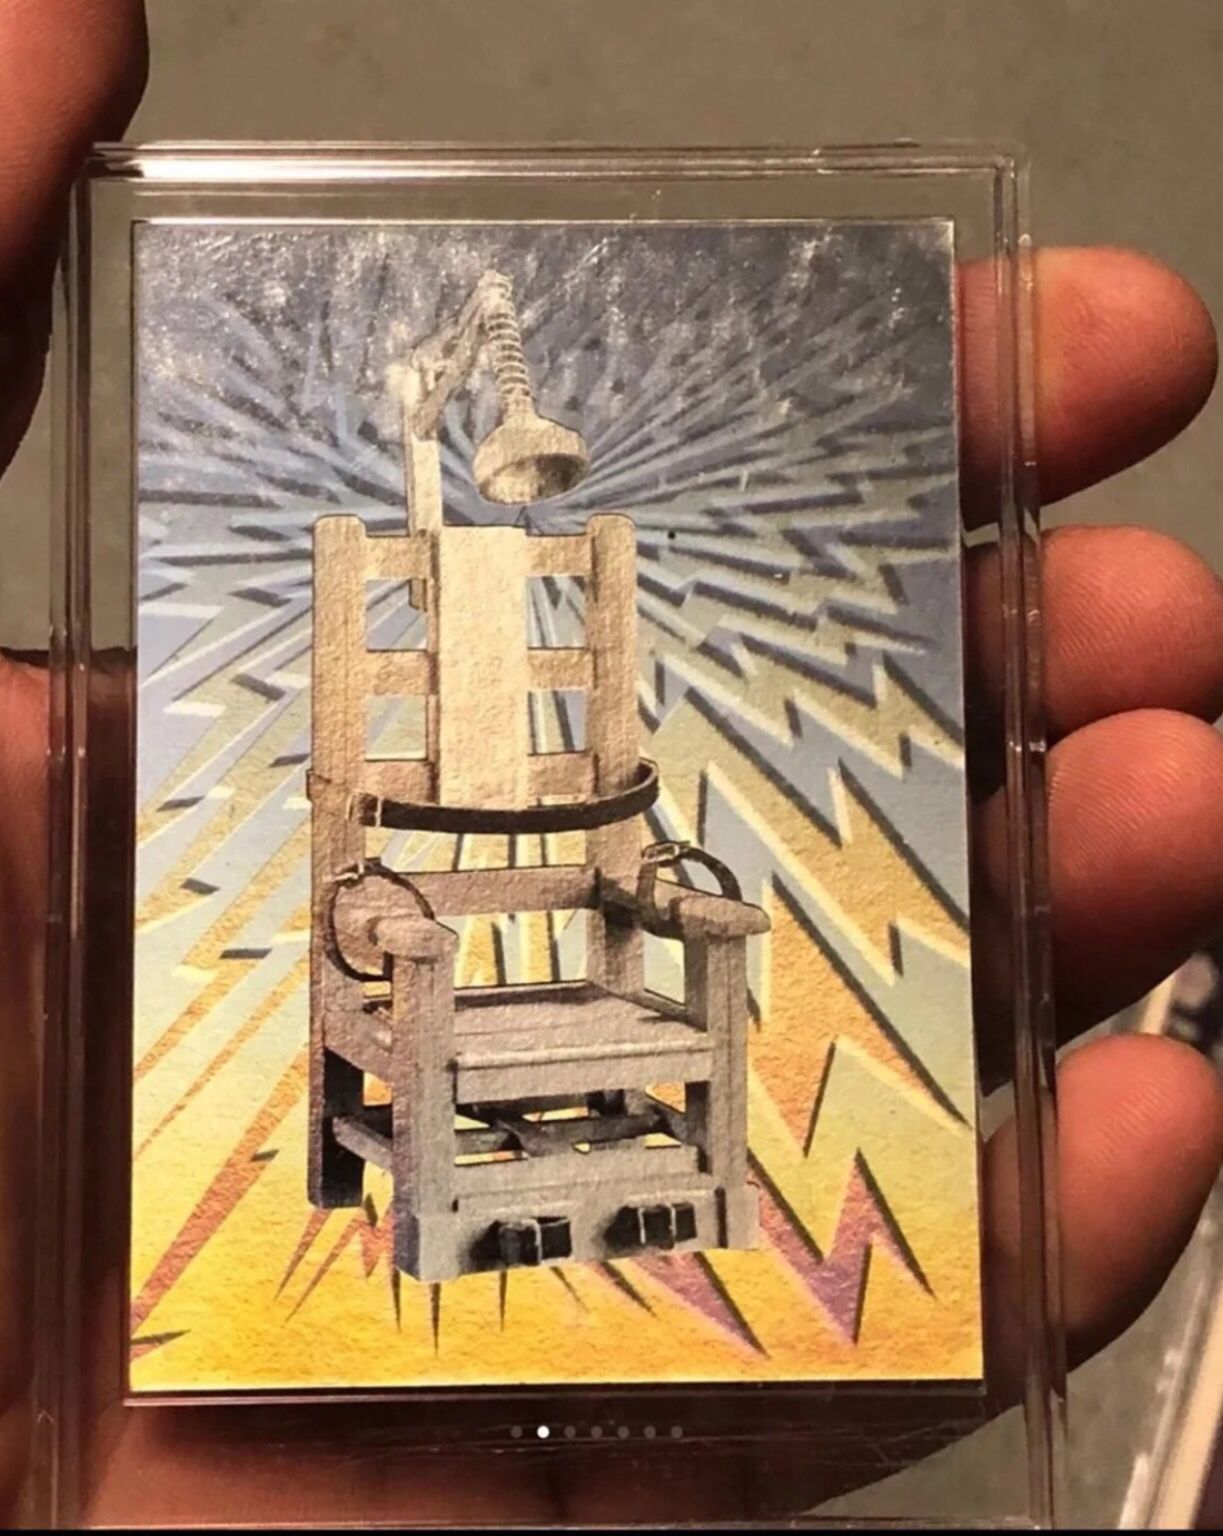 Ultra Rare Electric Chair Hologram Card Mint